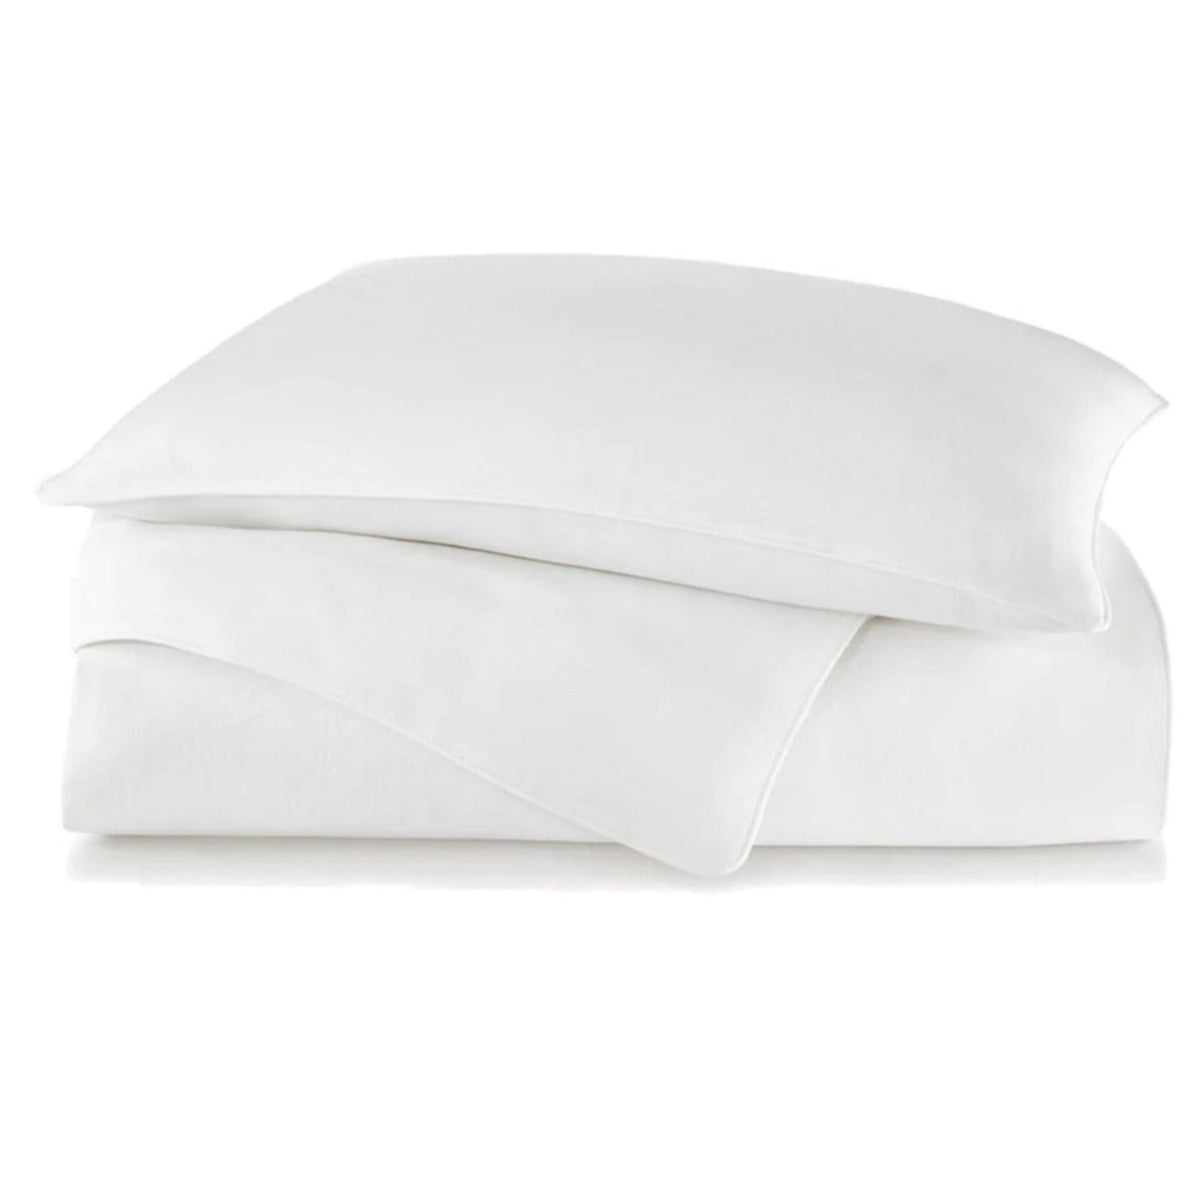 Stack of Peacock Alley Mandalay Linen Bedding Sham and Duvet Cover in Color White